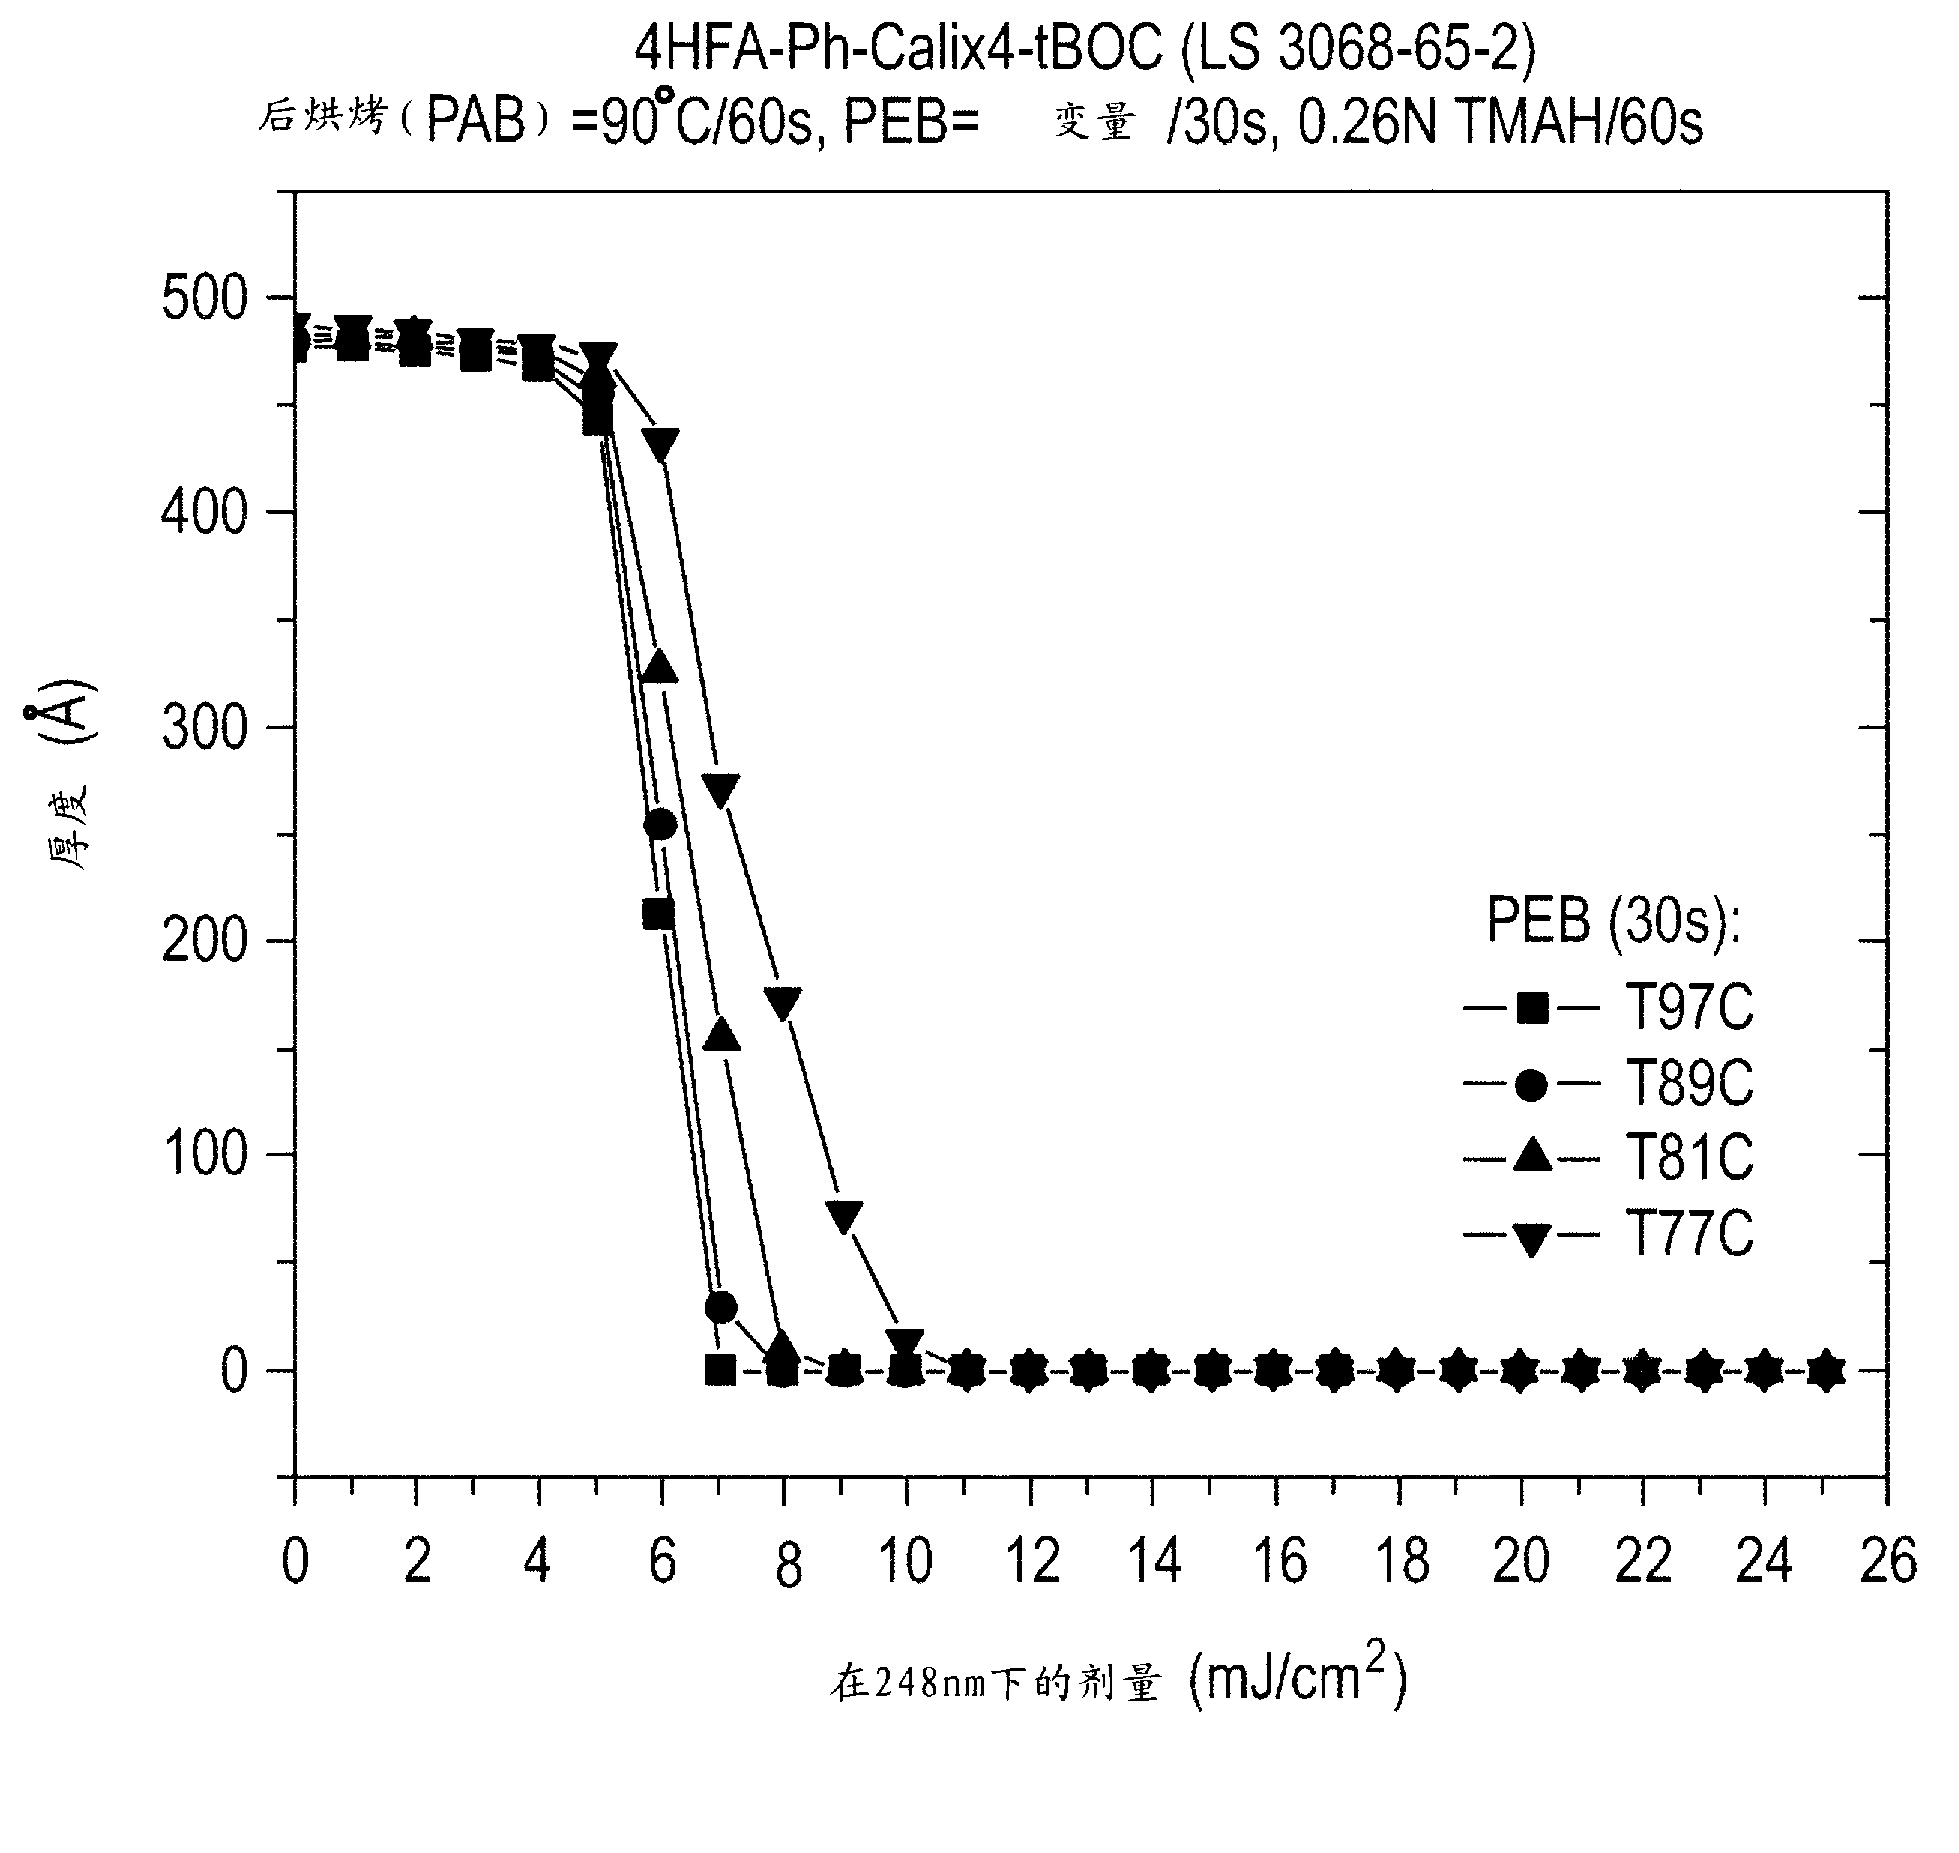 Fluoroalcohol containing molecular photoresist materials and processes of use